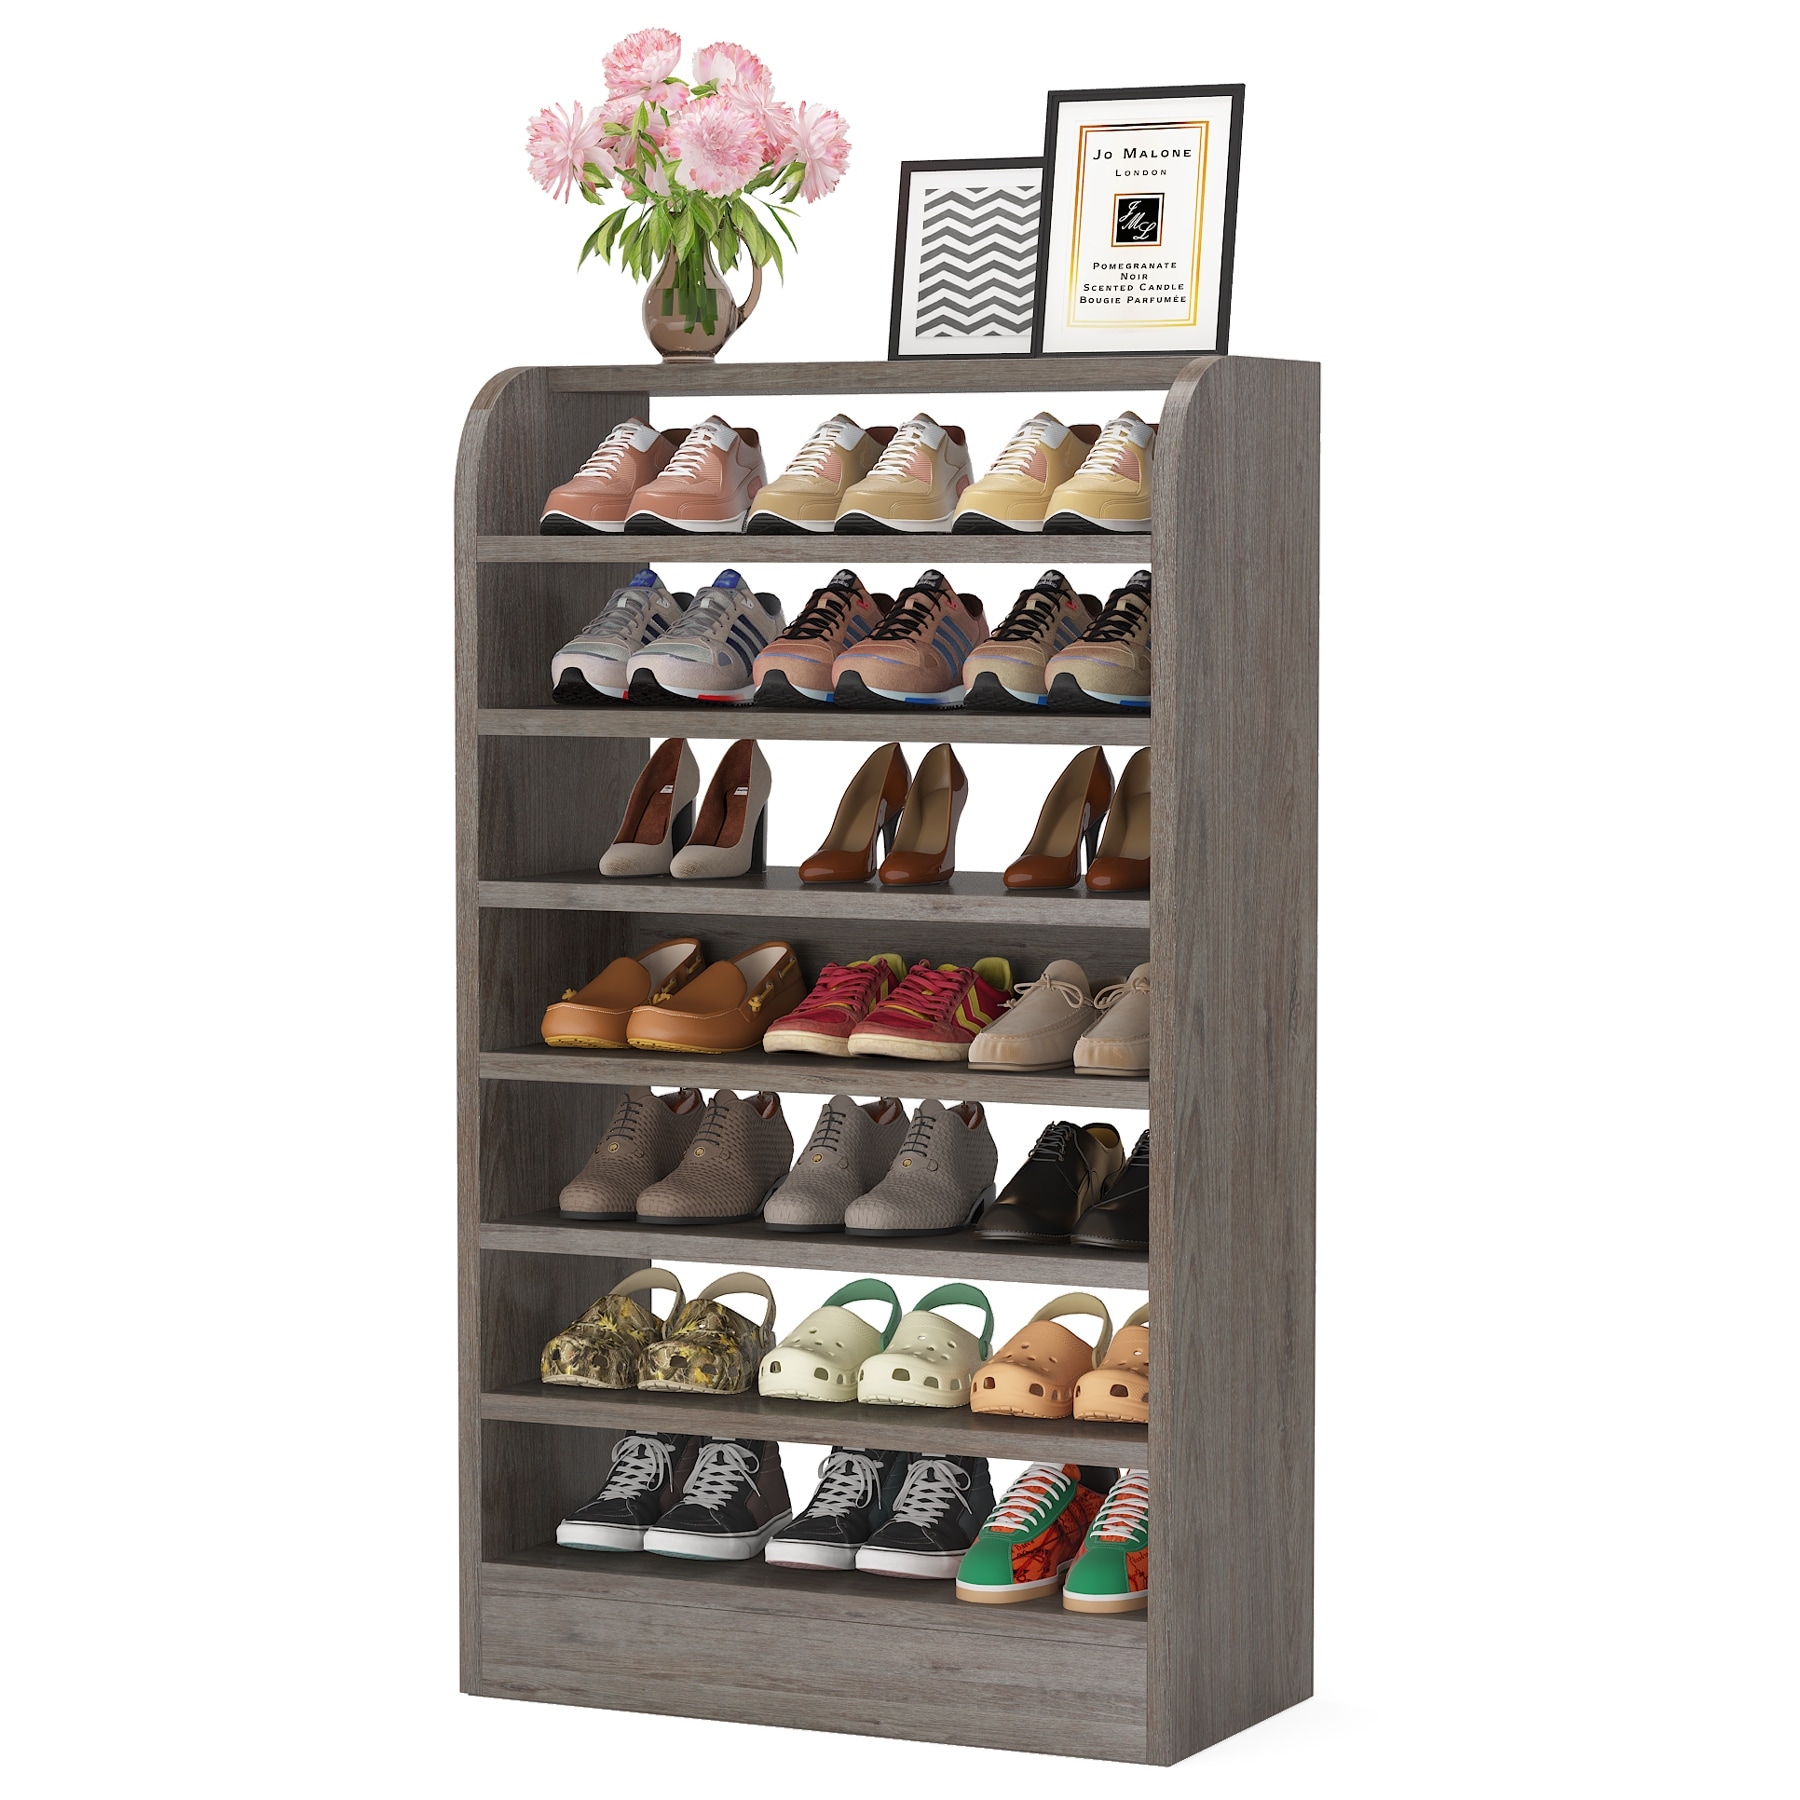 https://ak1.ostkcdn.com/images/products/is/images/direct/fe3bf39a3aec0e410934e51d86f0d7d8096b1e8a/Shoe-Cabinet-for-Entryway%2C-8-Tier-Tall-Shoe-Shelf-Shoes-Rack-Organizer%2C-Wooden-Shoe-Storage-Cabinet-for-Hallway%2C-Closet.jpg